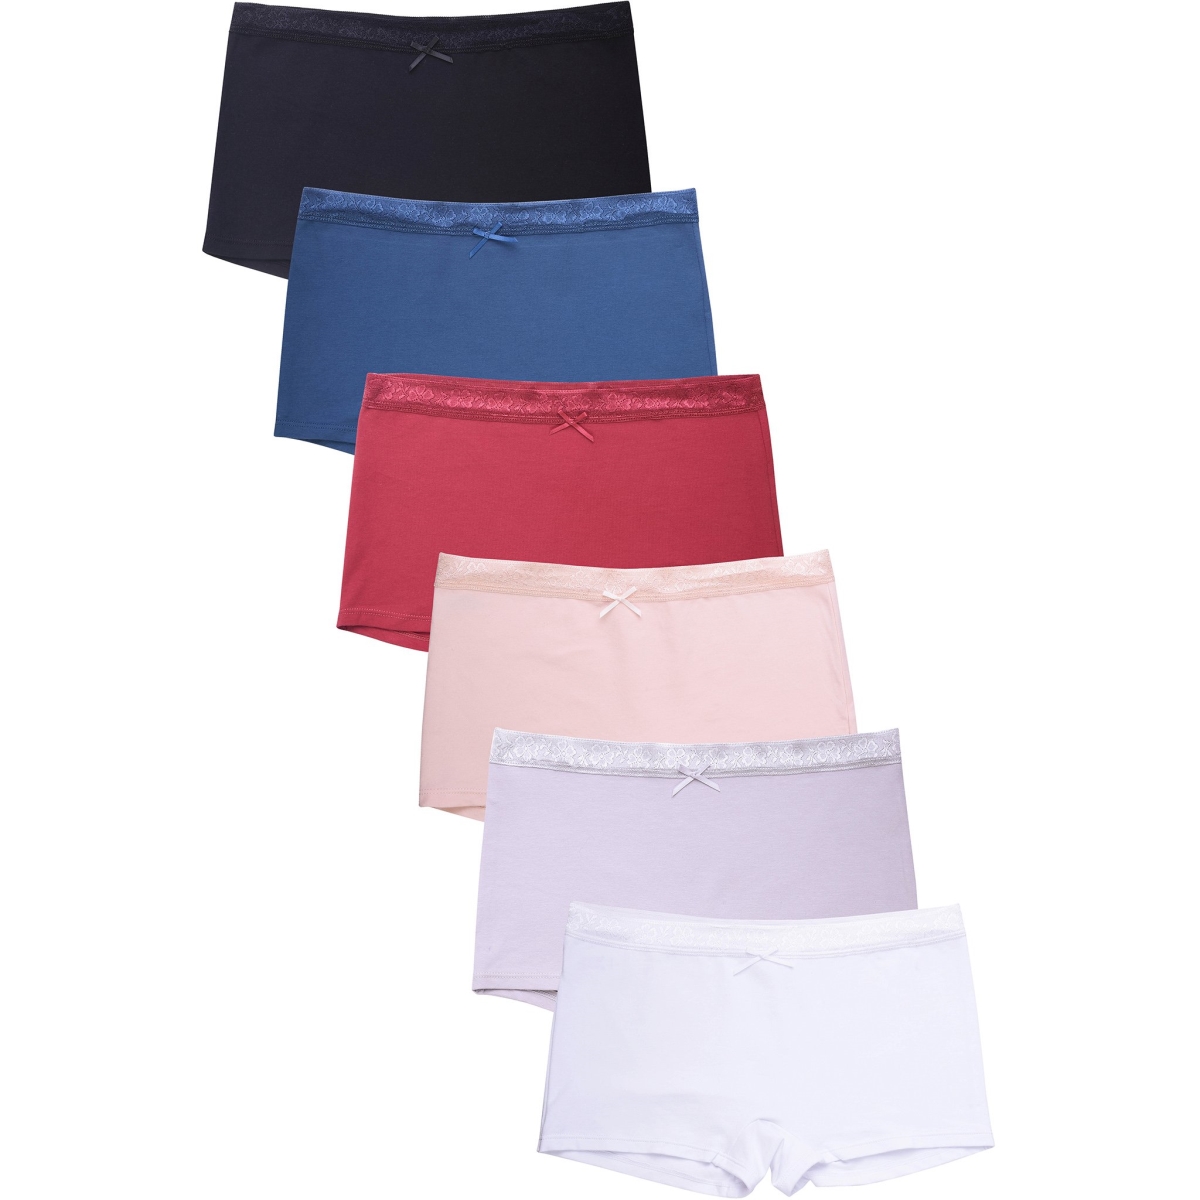 Picture of 247 Frenzy 247-LP1384CB3-LG Sofra Womens Essentials Cotton Stretch Boyshort Panty Underwear - Assorted Color - Large - Pack of 6